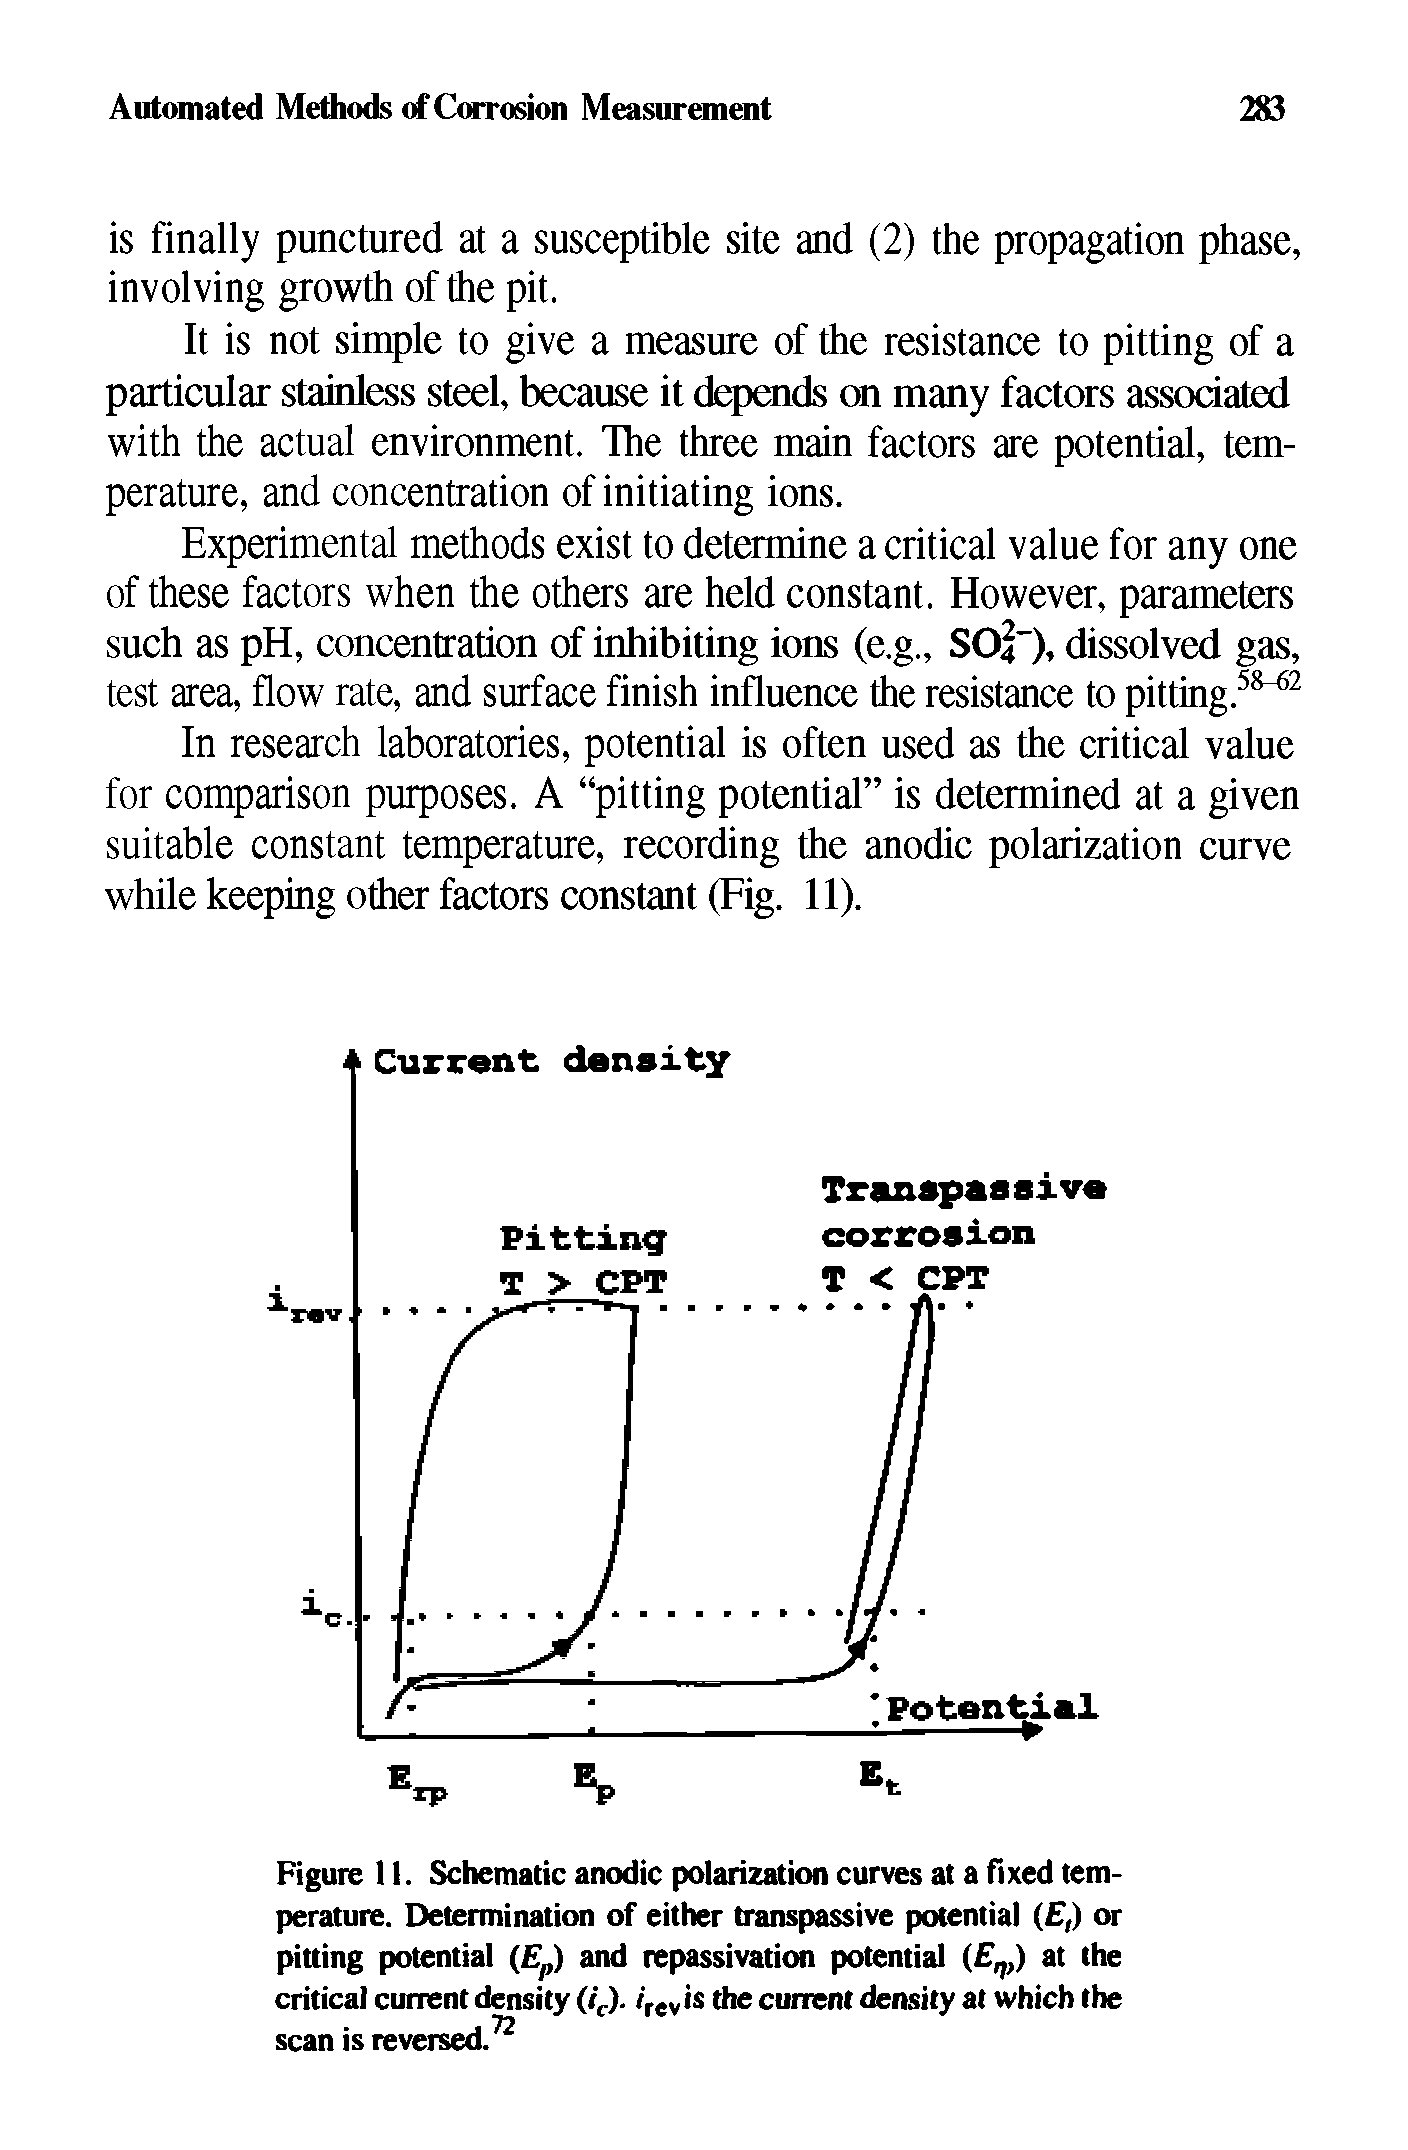 Figure II. Schematic anodic polarization curves at a fixed temperature. Determination of either transpassive potential ( ,) or pitting potential ( p and repassivation potential ( ,) at the critical current density (/ ). t rcvis the current density at which the scan is reversed. ...